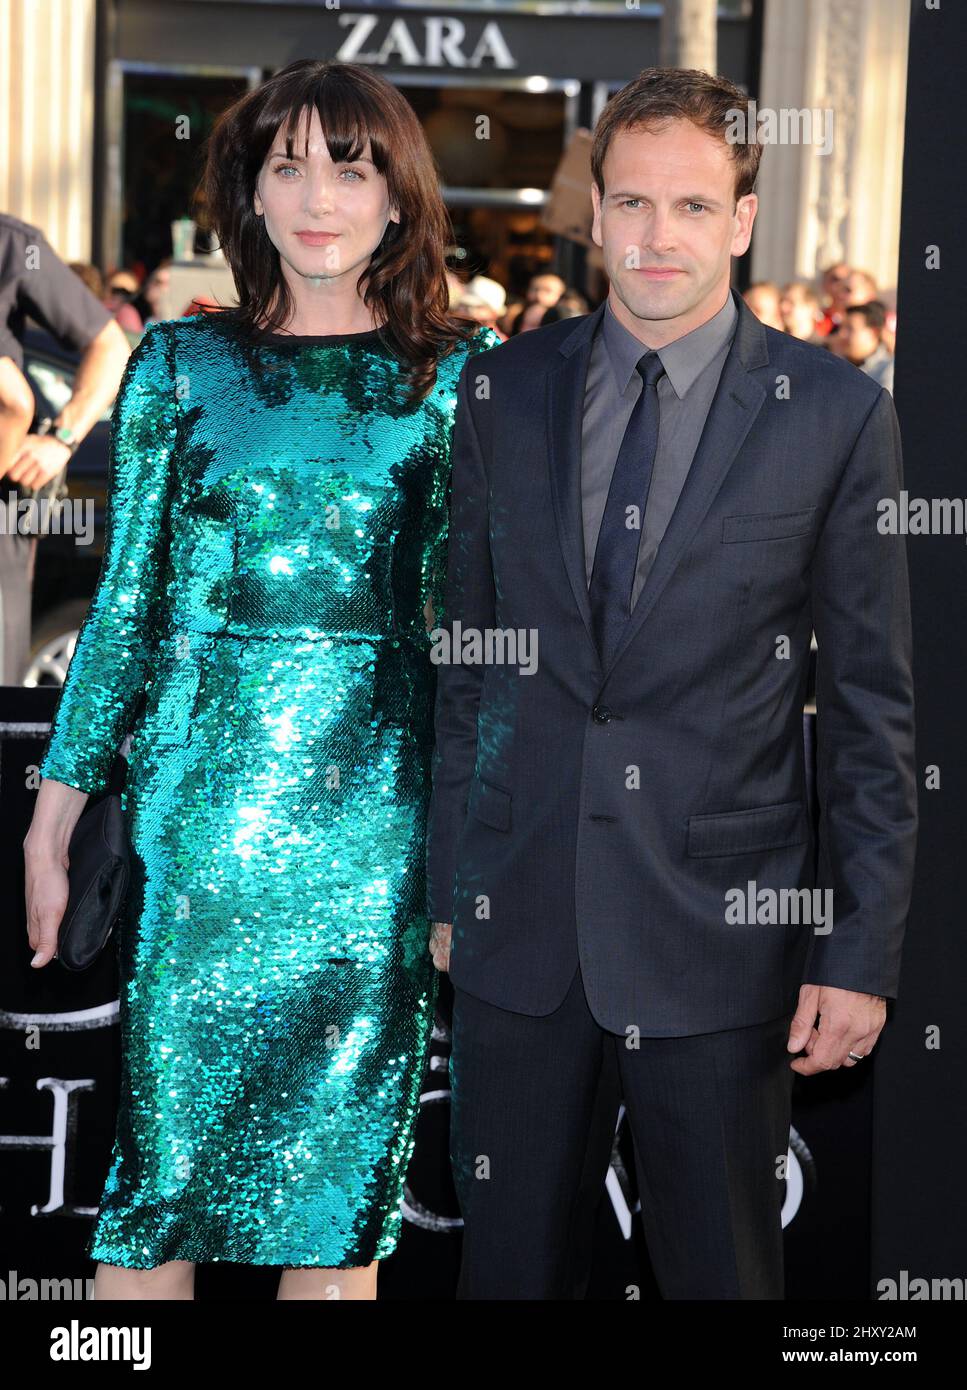 Jonny Lee Miller and wife Michele Hicks arriving at the 'Dark Shadows' Los Angeles Premiere held at the Chinese Theatre in Hollywood, California Stock Photo